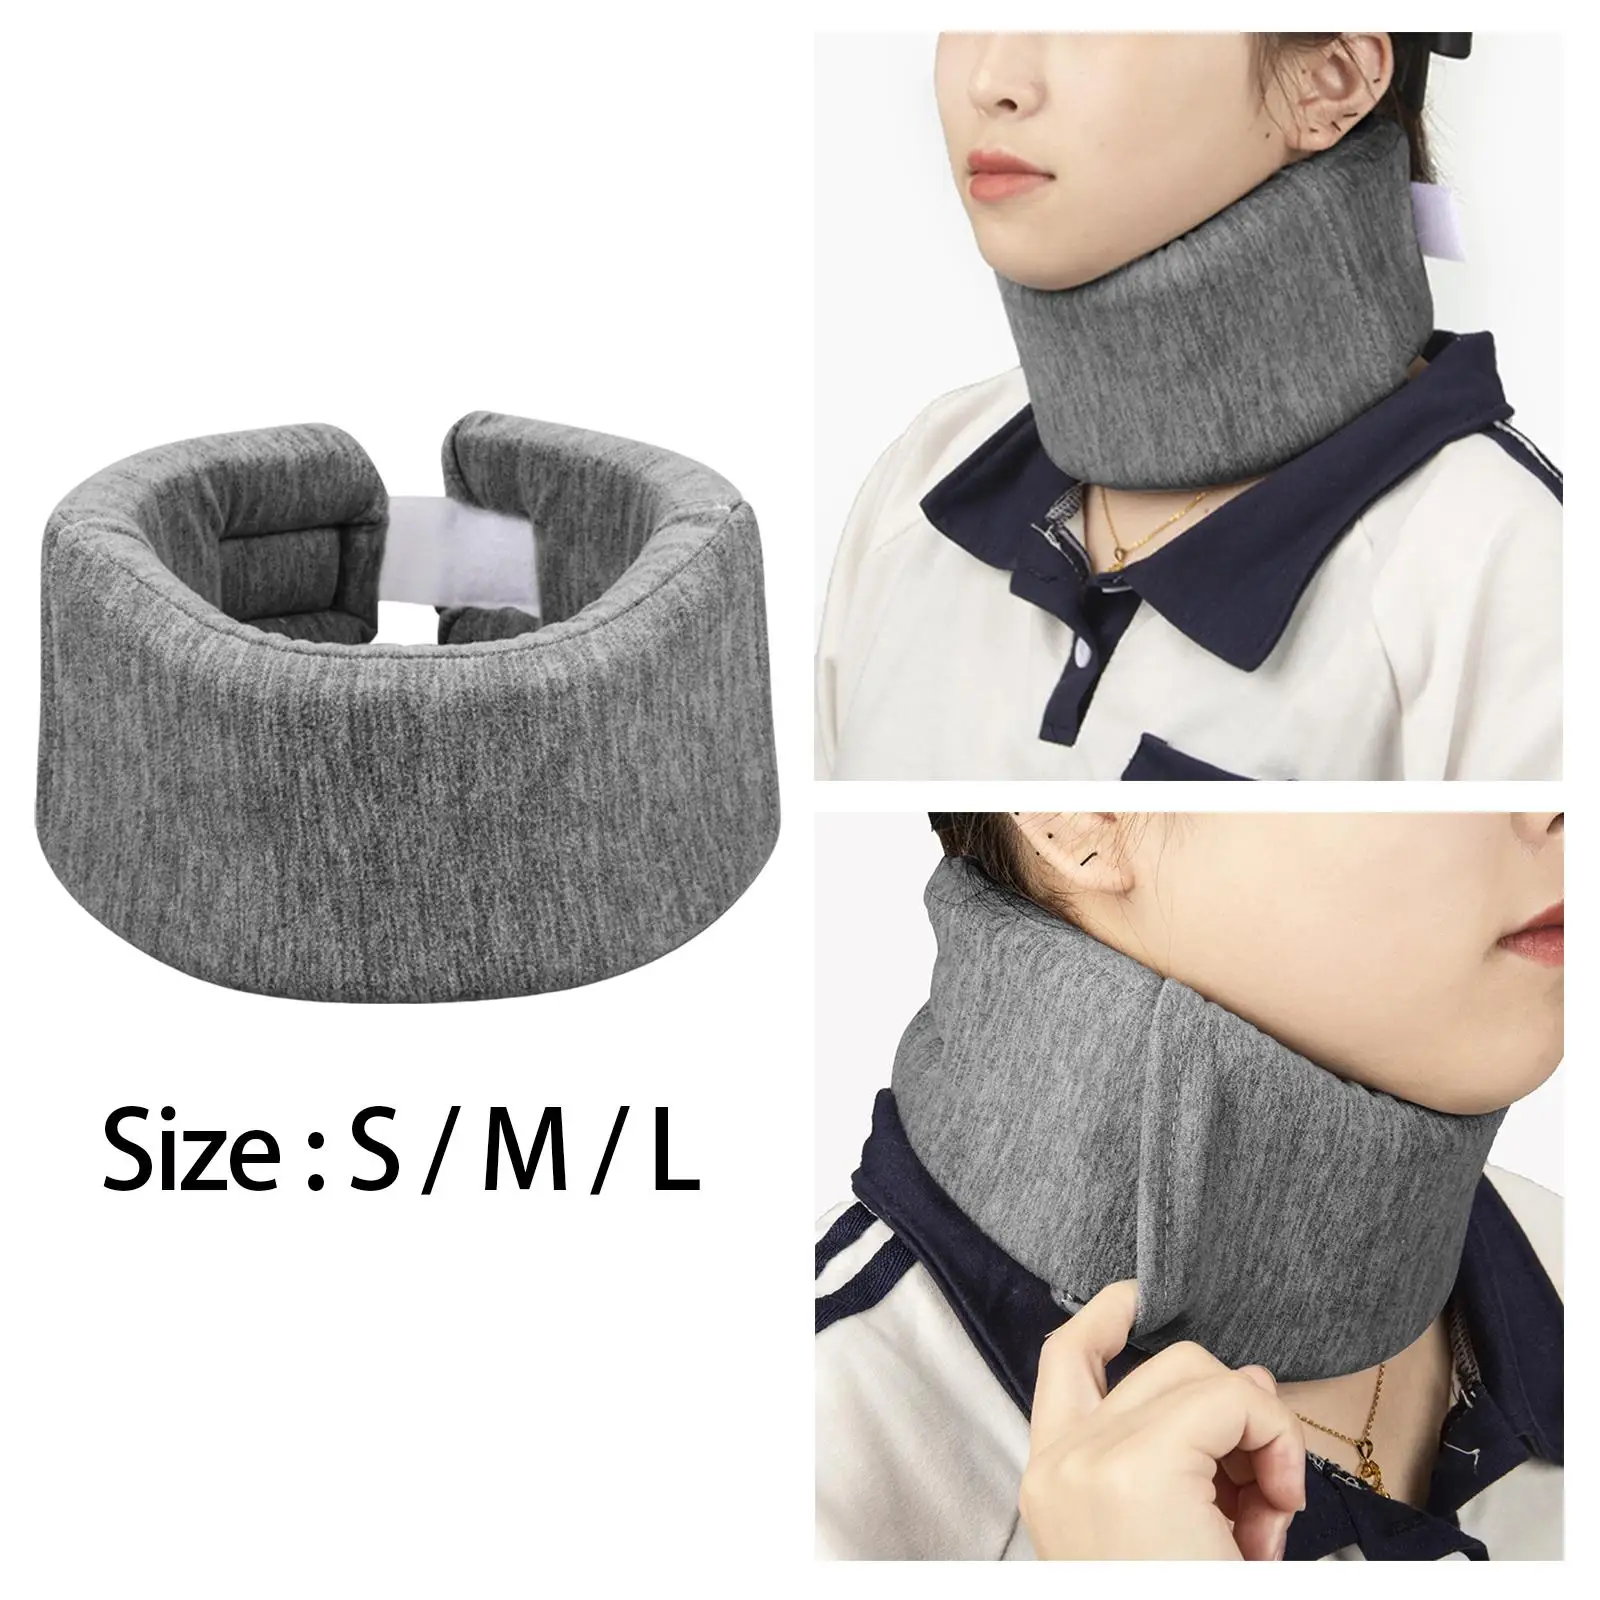 Travel Pillow Travel Essentials Breathable Ergonomic Durable Neck Pillow for Car Travel Plane Airplane Neck Support Adult